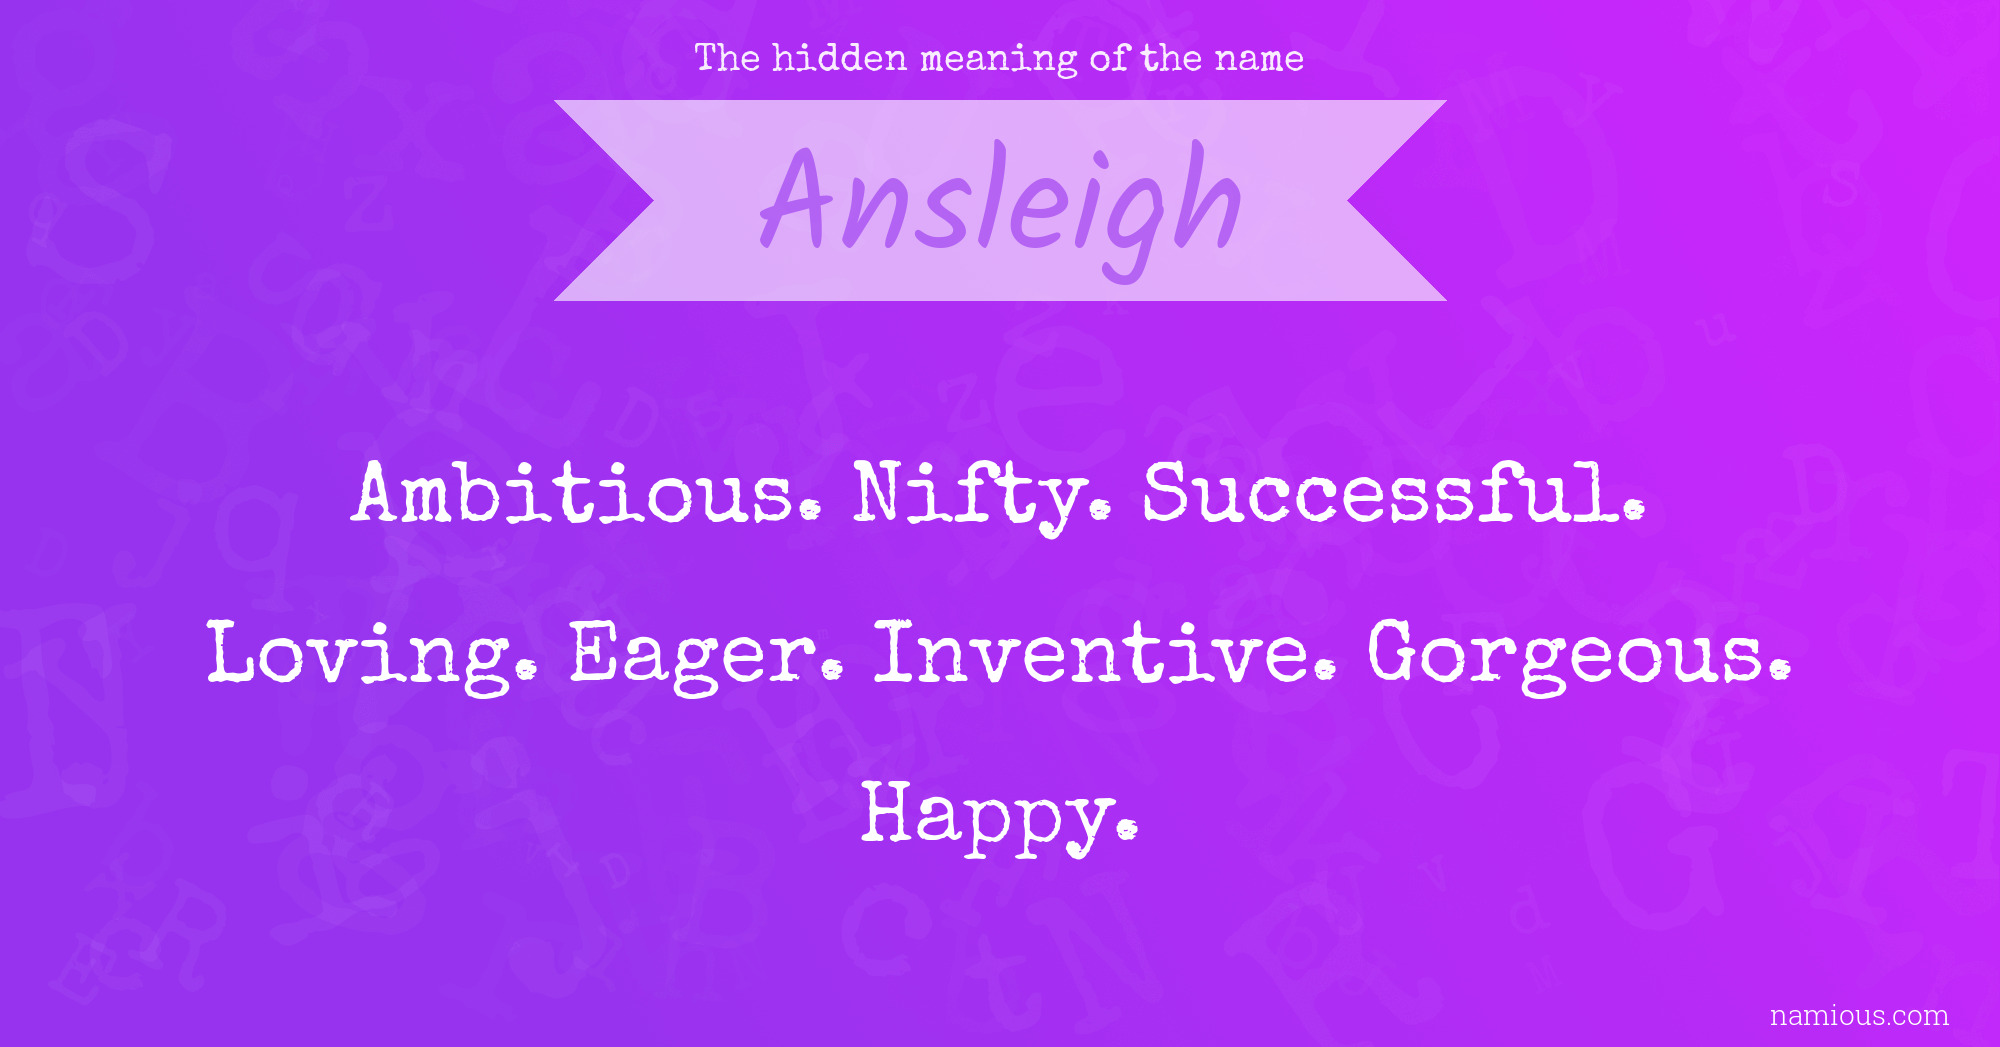 The hidden meaning of the name Ansleigh